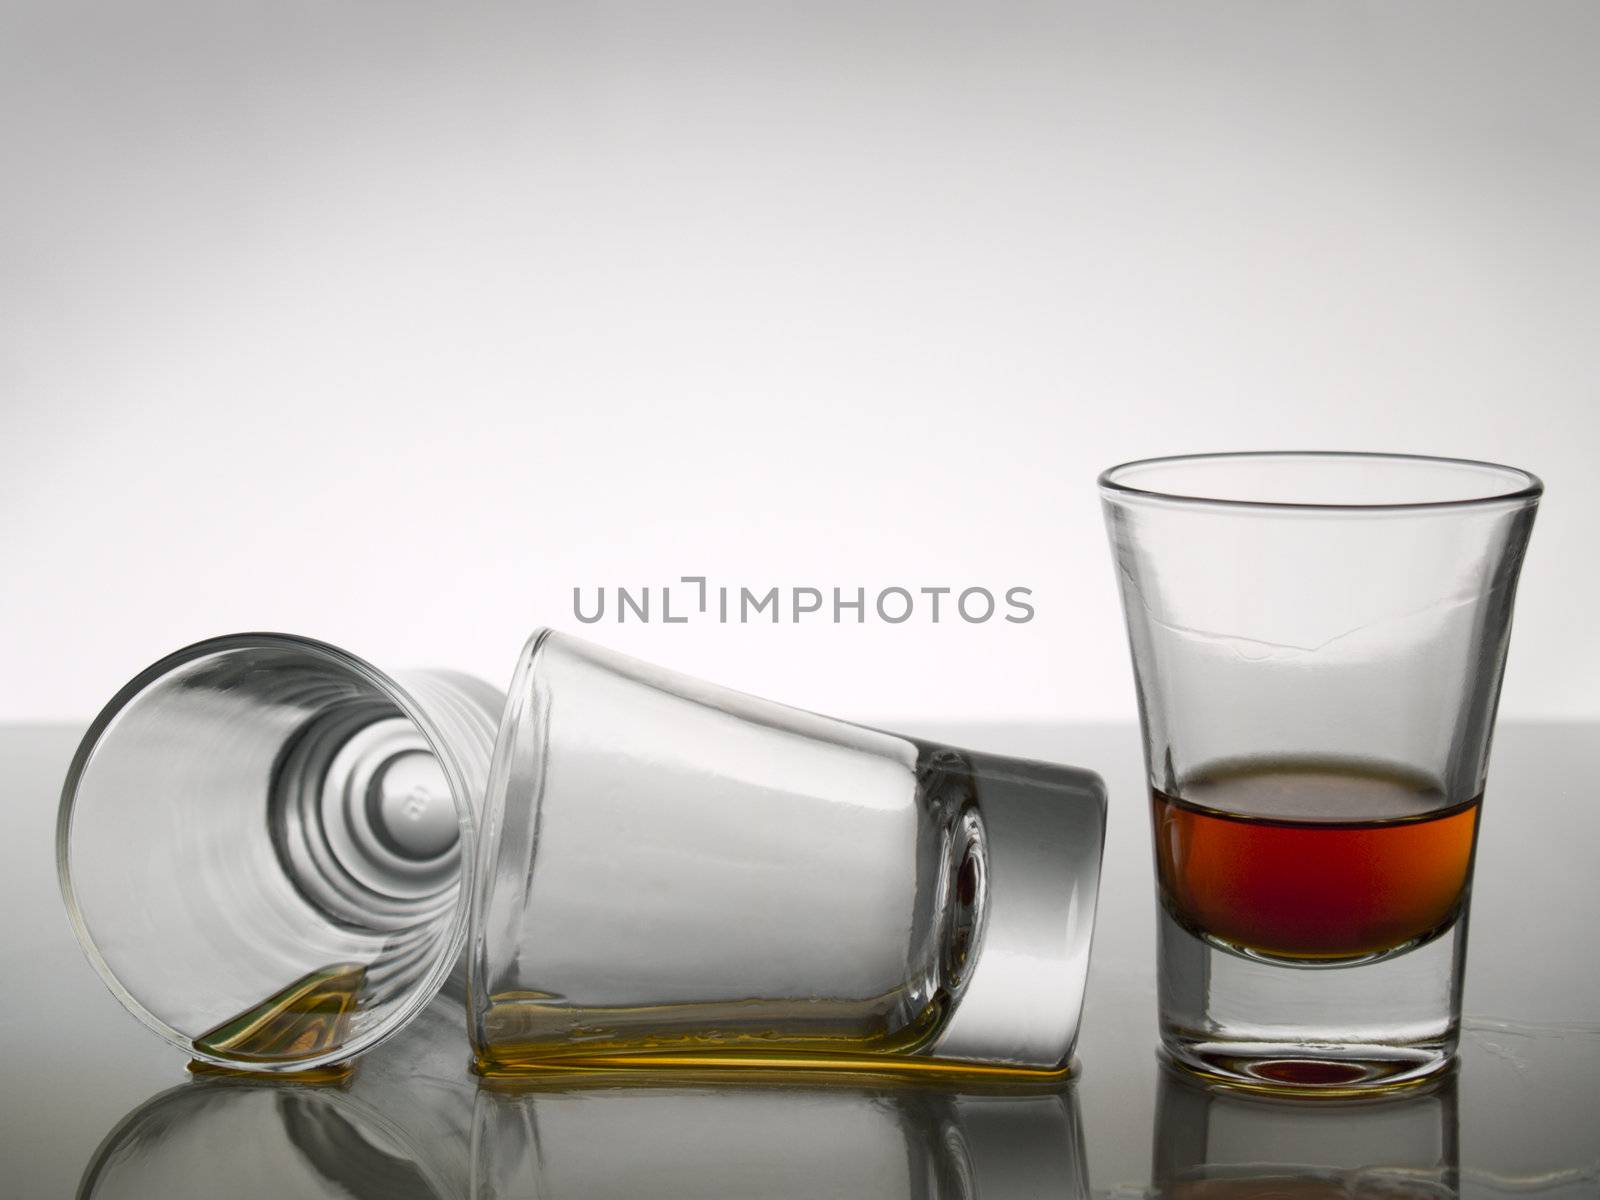 Three shots of whisky on white background over gray floor.